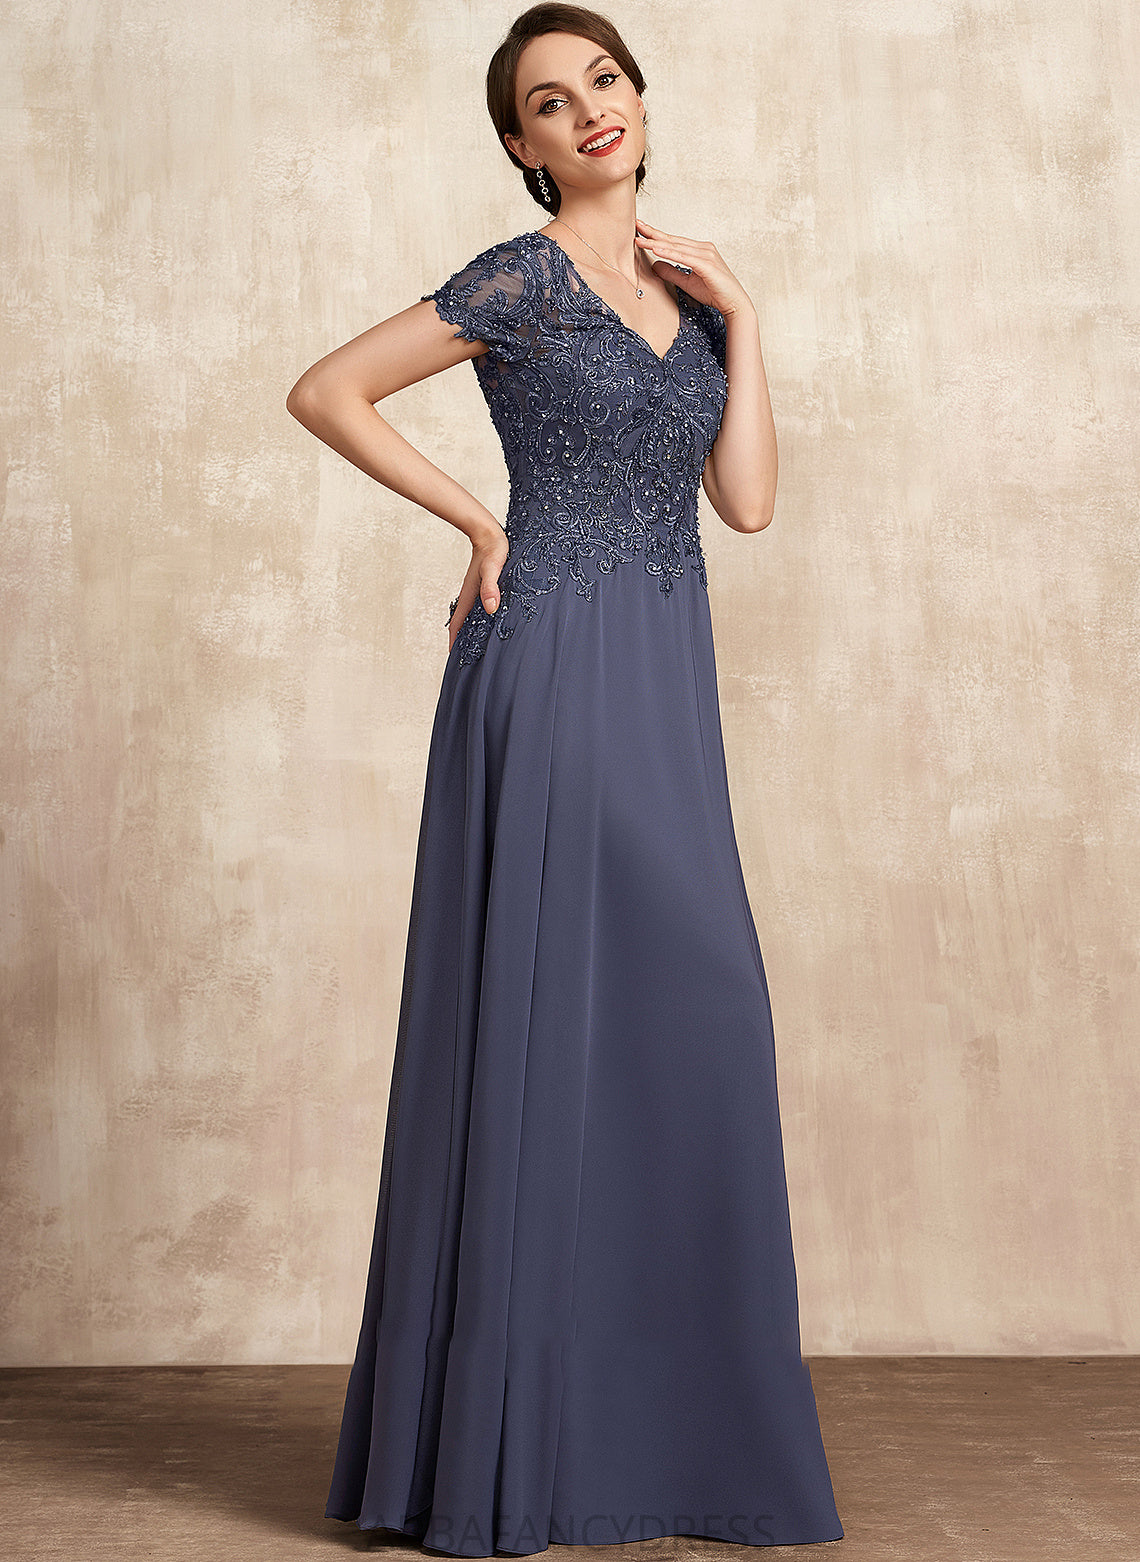 A-Line Dress Floor-Length Sequins Lace Bride Beading With V-neck Yesenia Mother of the Bride Dresses Chiffon the of Mother